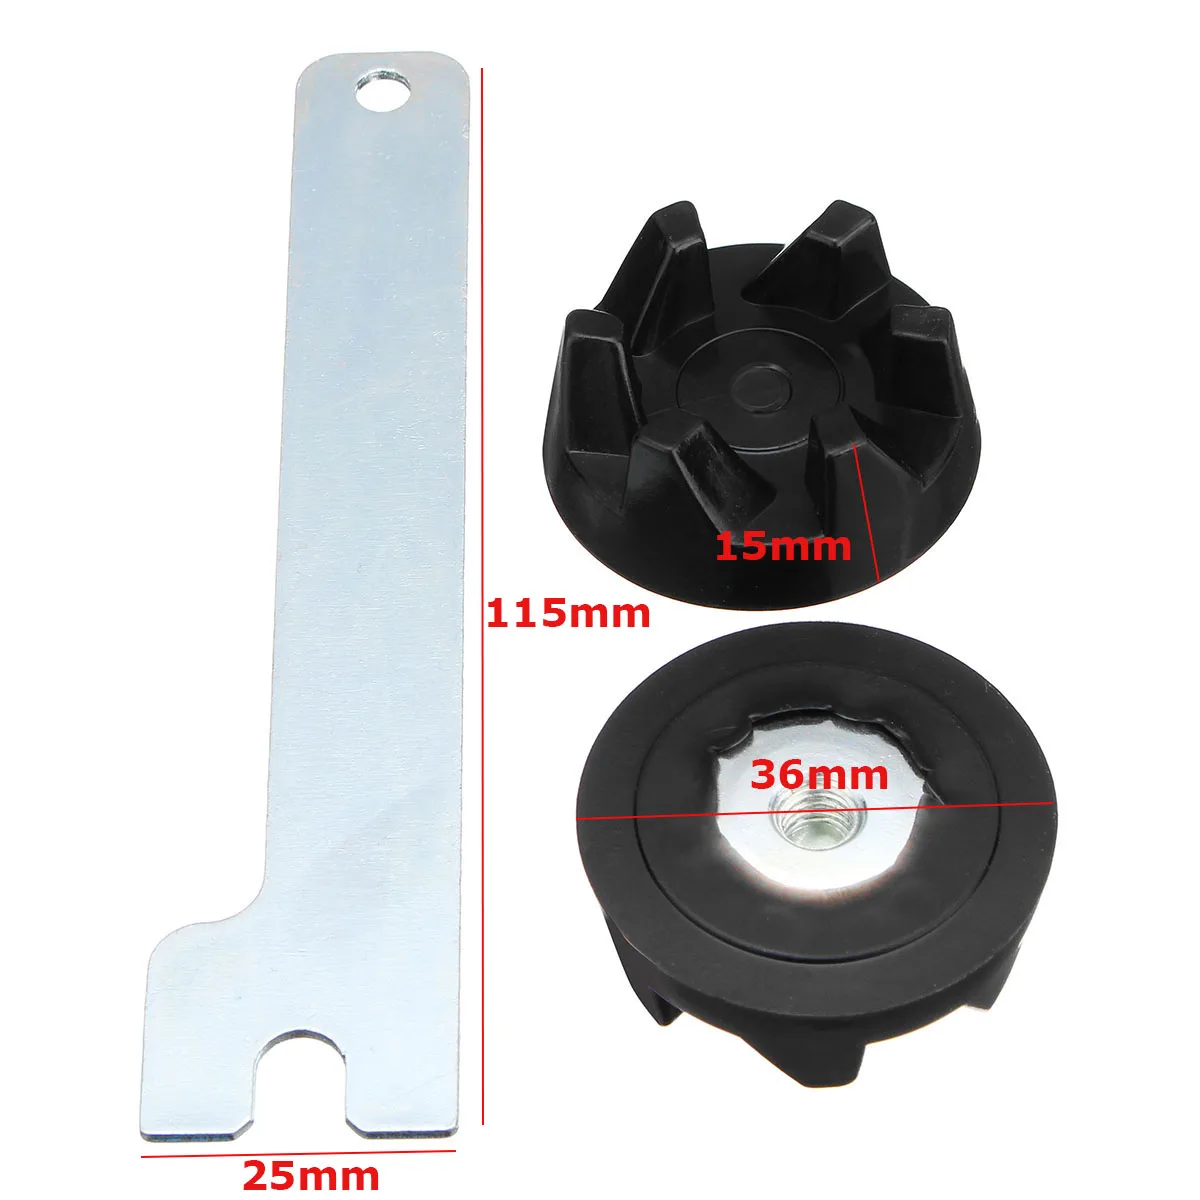 Two Rubber Coupler Gear Clutch & Removal Tool For Blender KitchenAid 9704230 